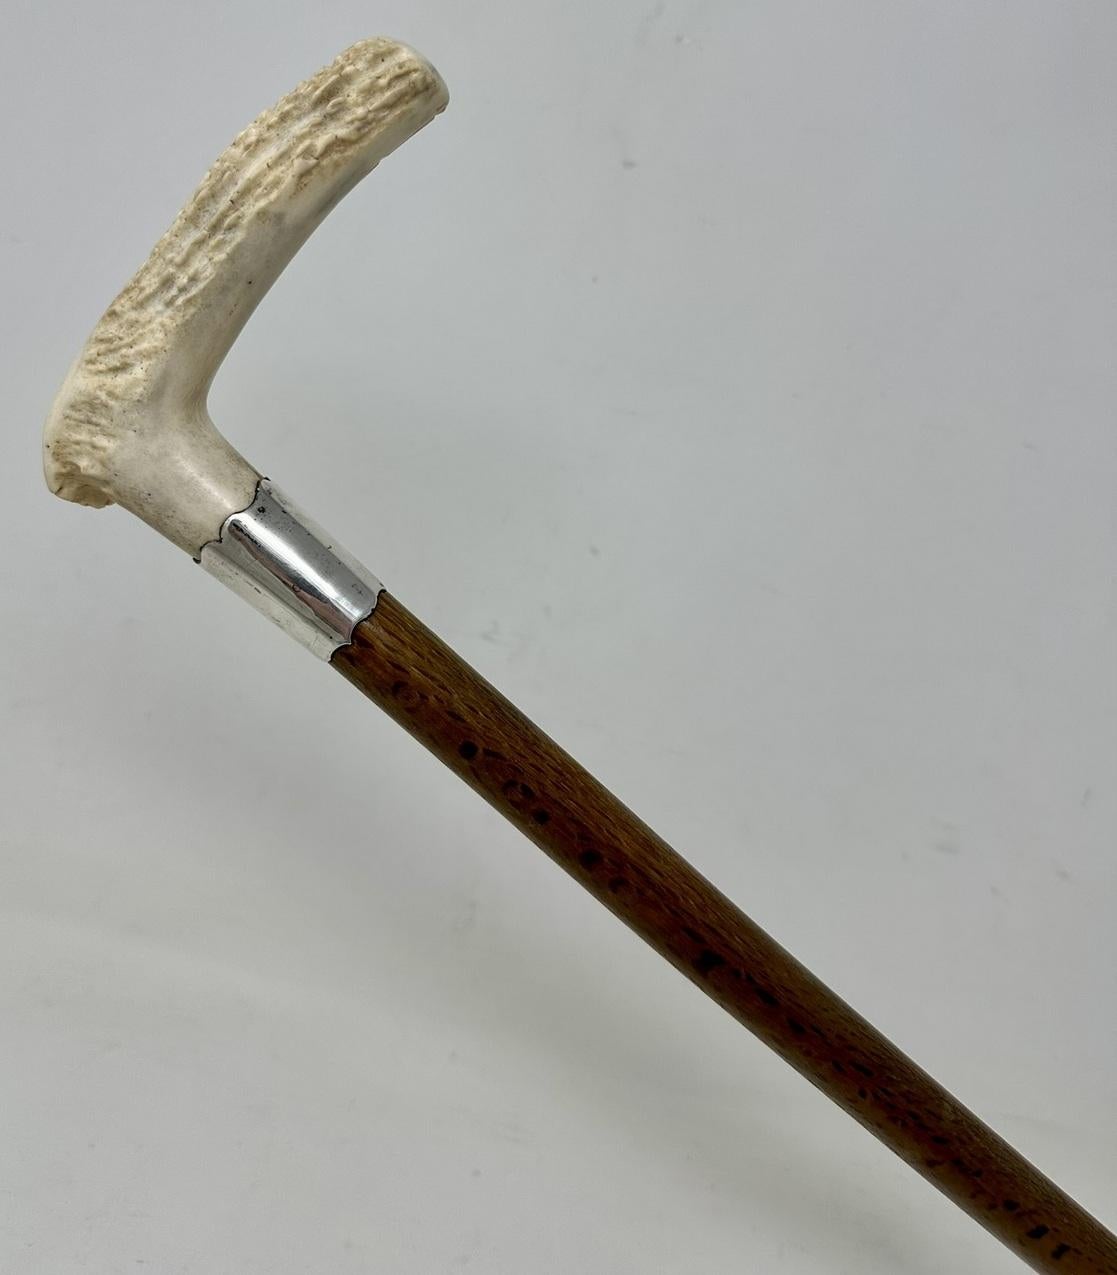 Antique Vintage Wooden Stag Antler Horn Walking Stick Cane Sterling Silver 1899  In Good Condition For Sale In Dublin, Ireland